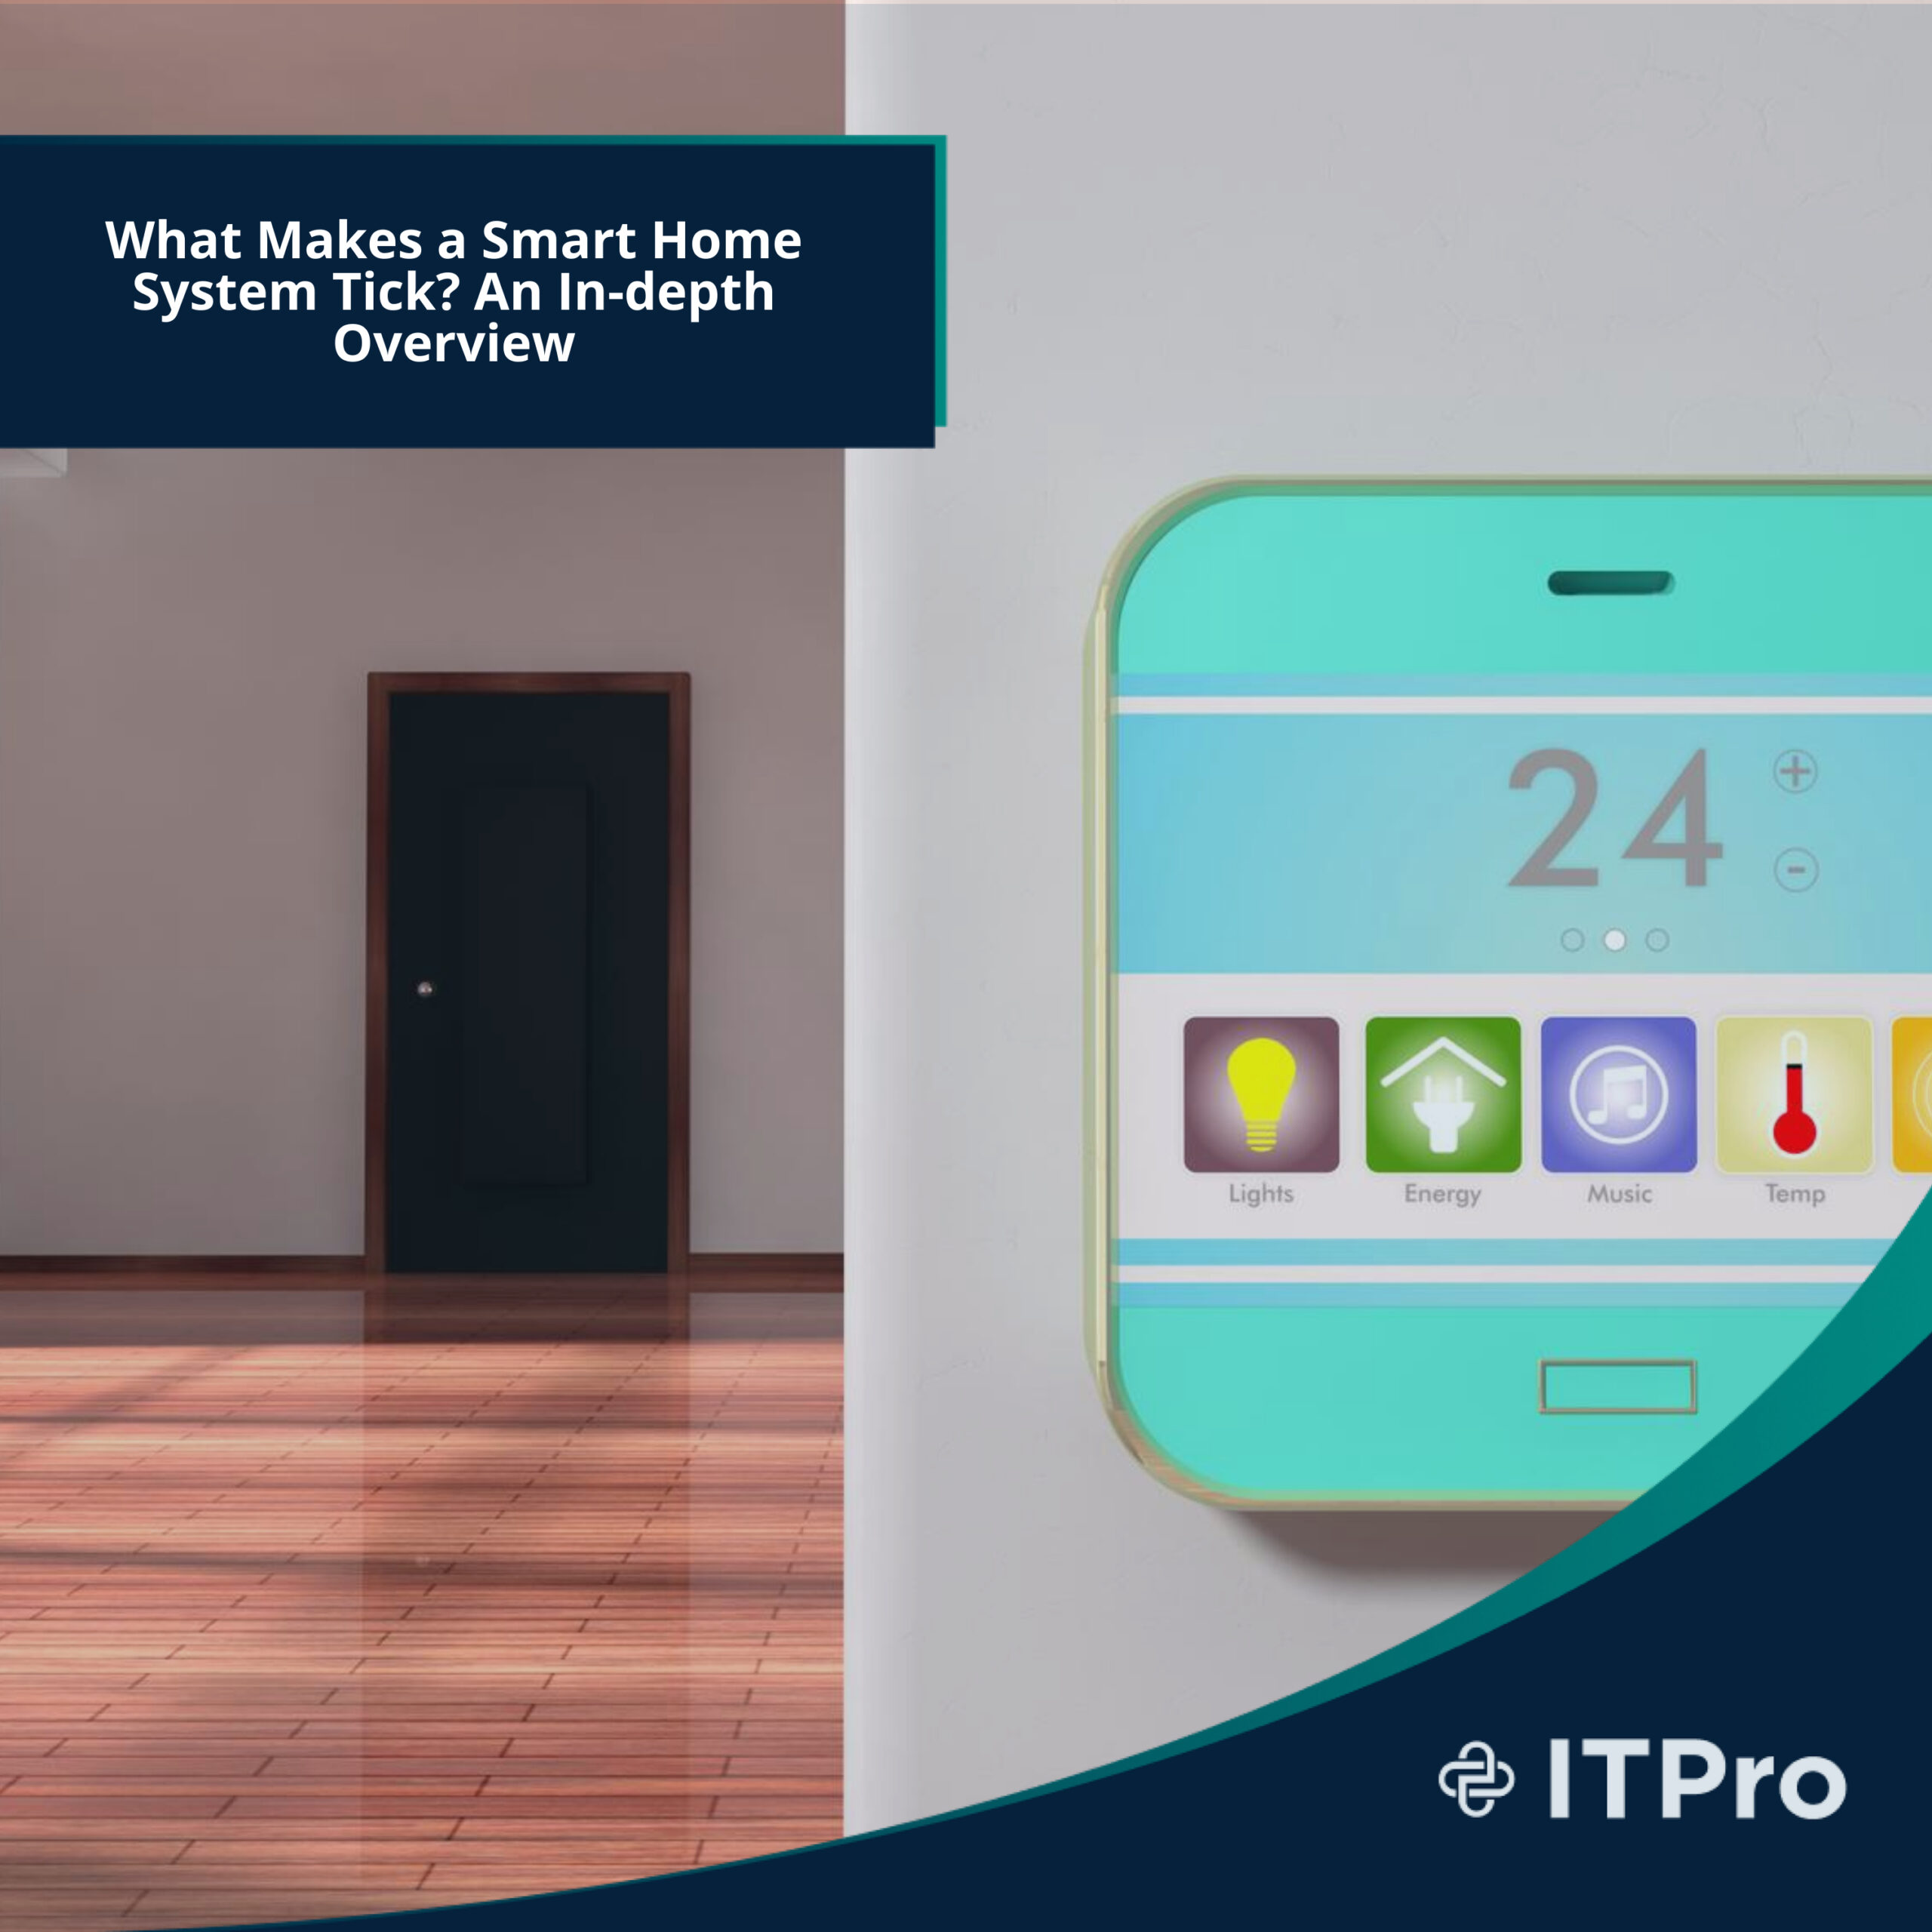 What Makes a Smart Home System Tick? An In-depth Overview